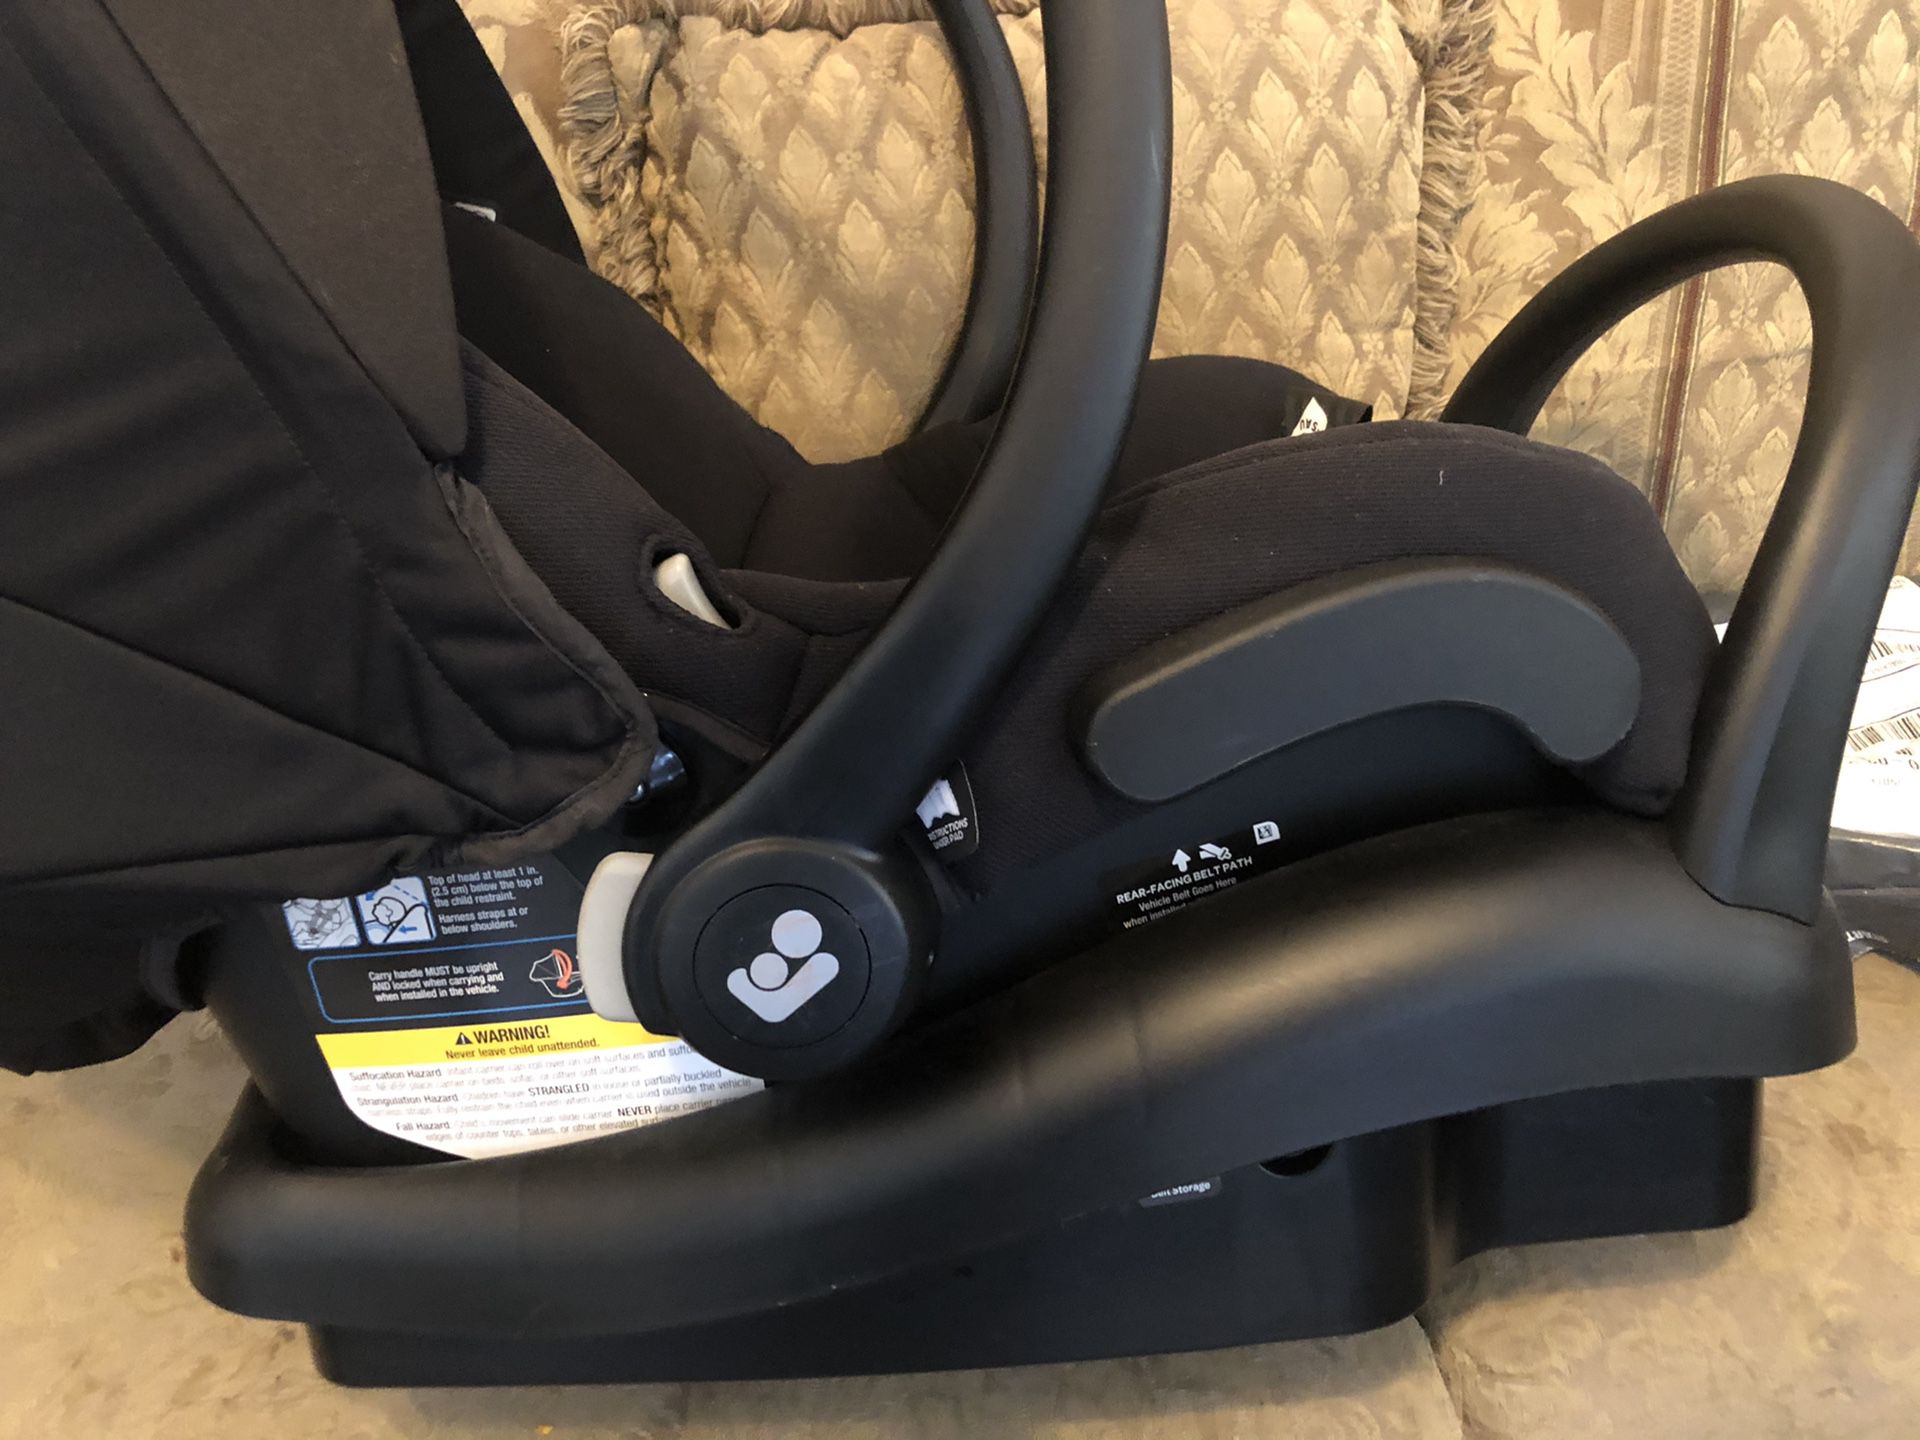 Maxi Cosí Car seat and stroller set